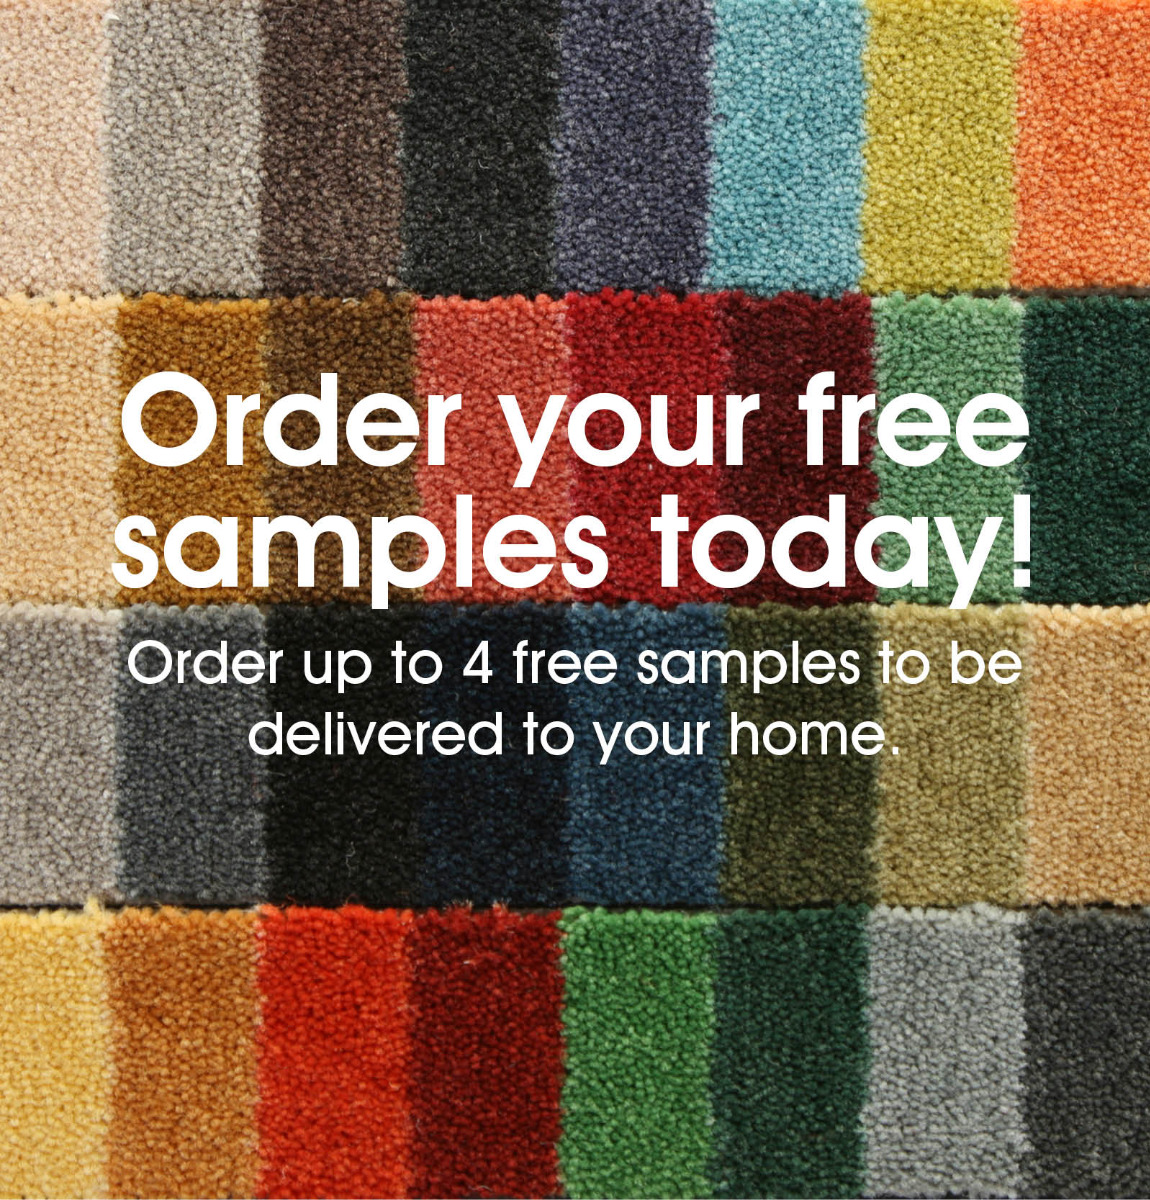 United Carpets - Order free samples today